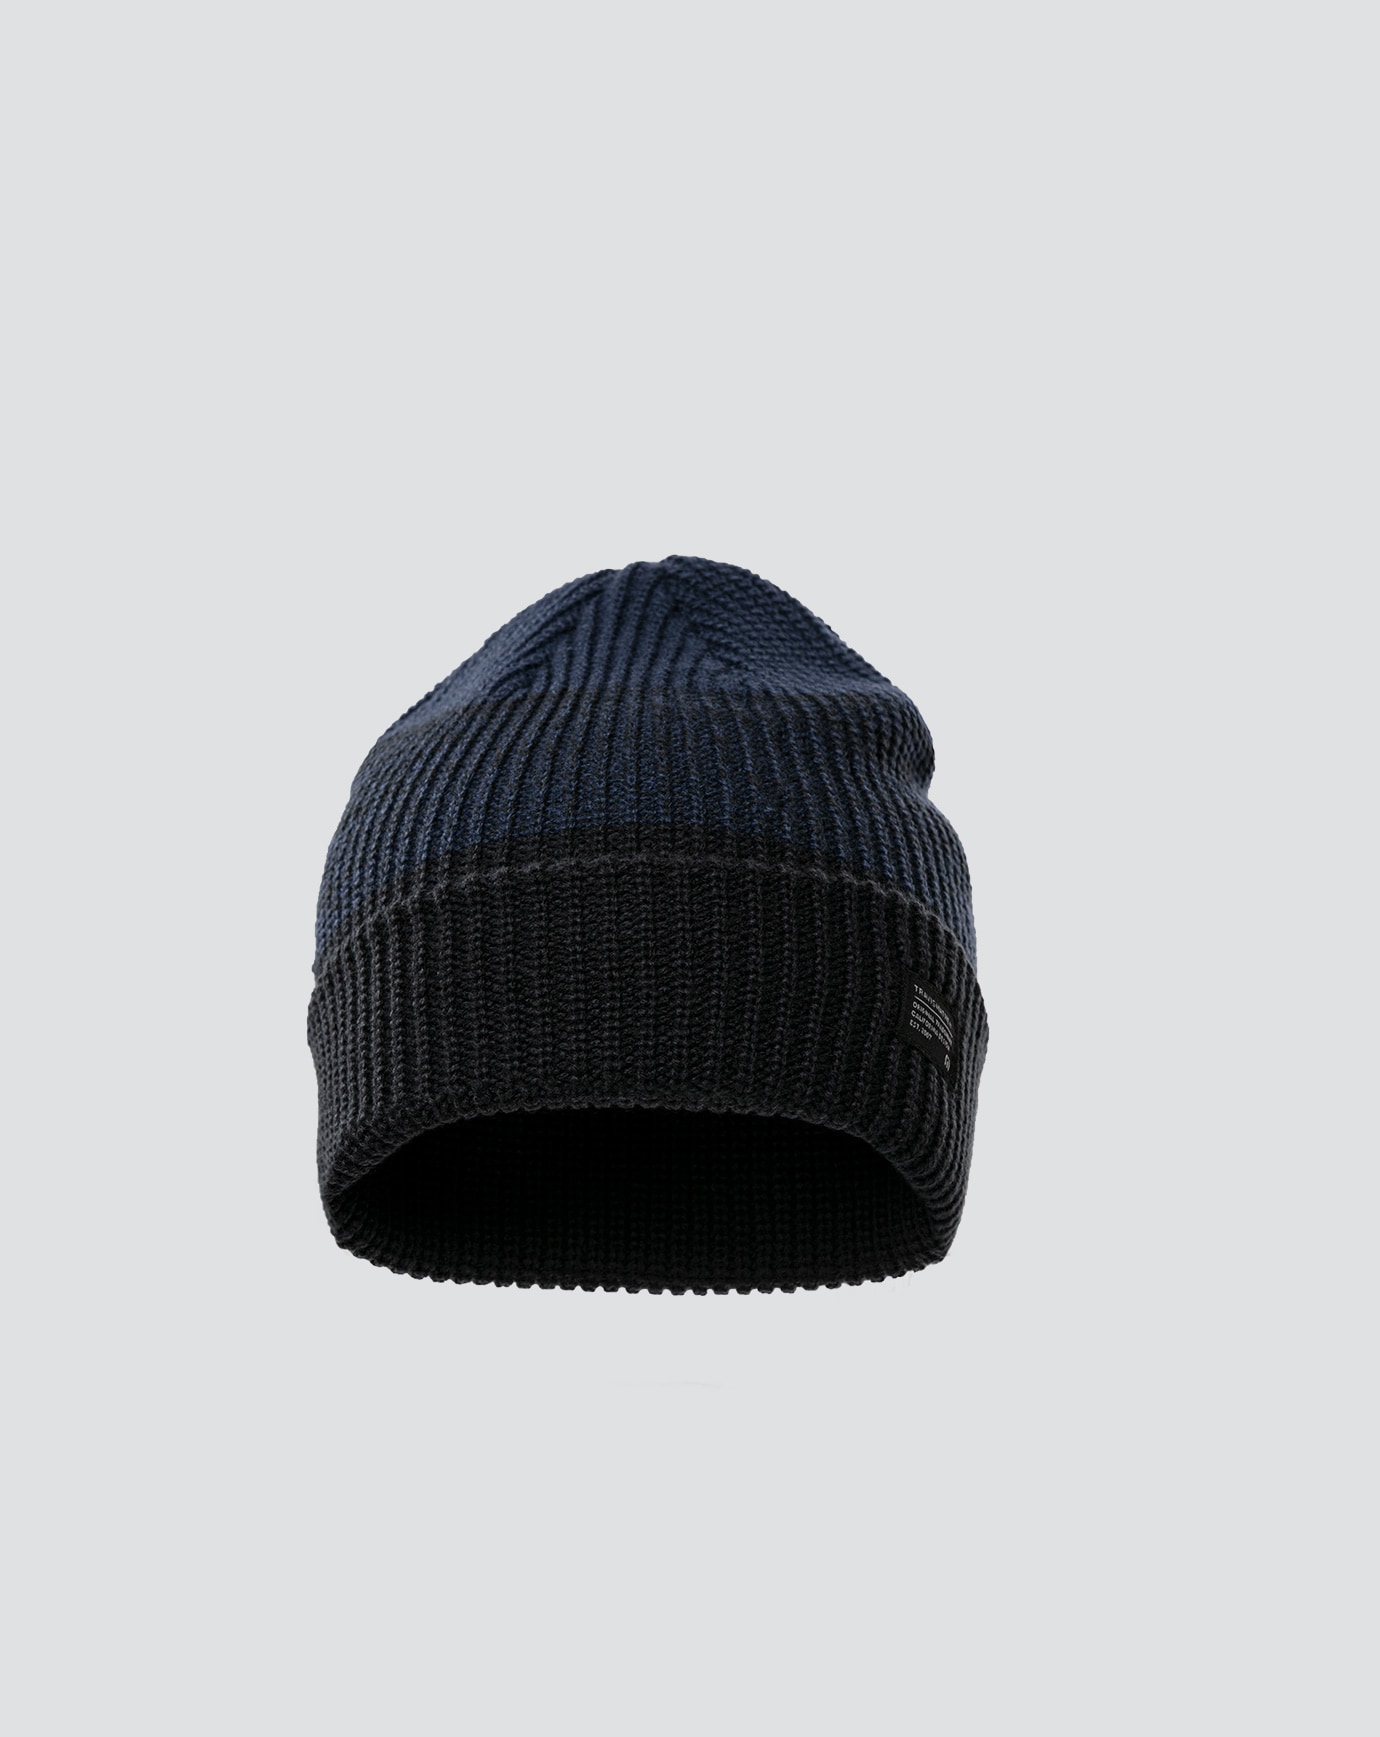 PREVAILING WINDS BEANIE Image Thumbnail 1